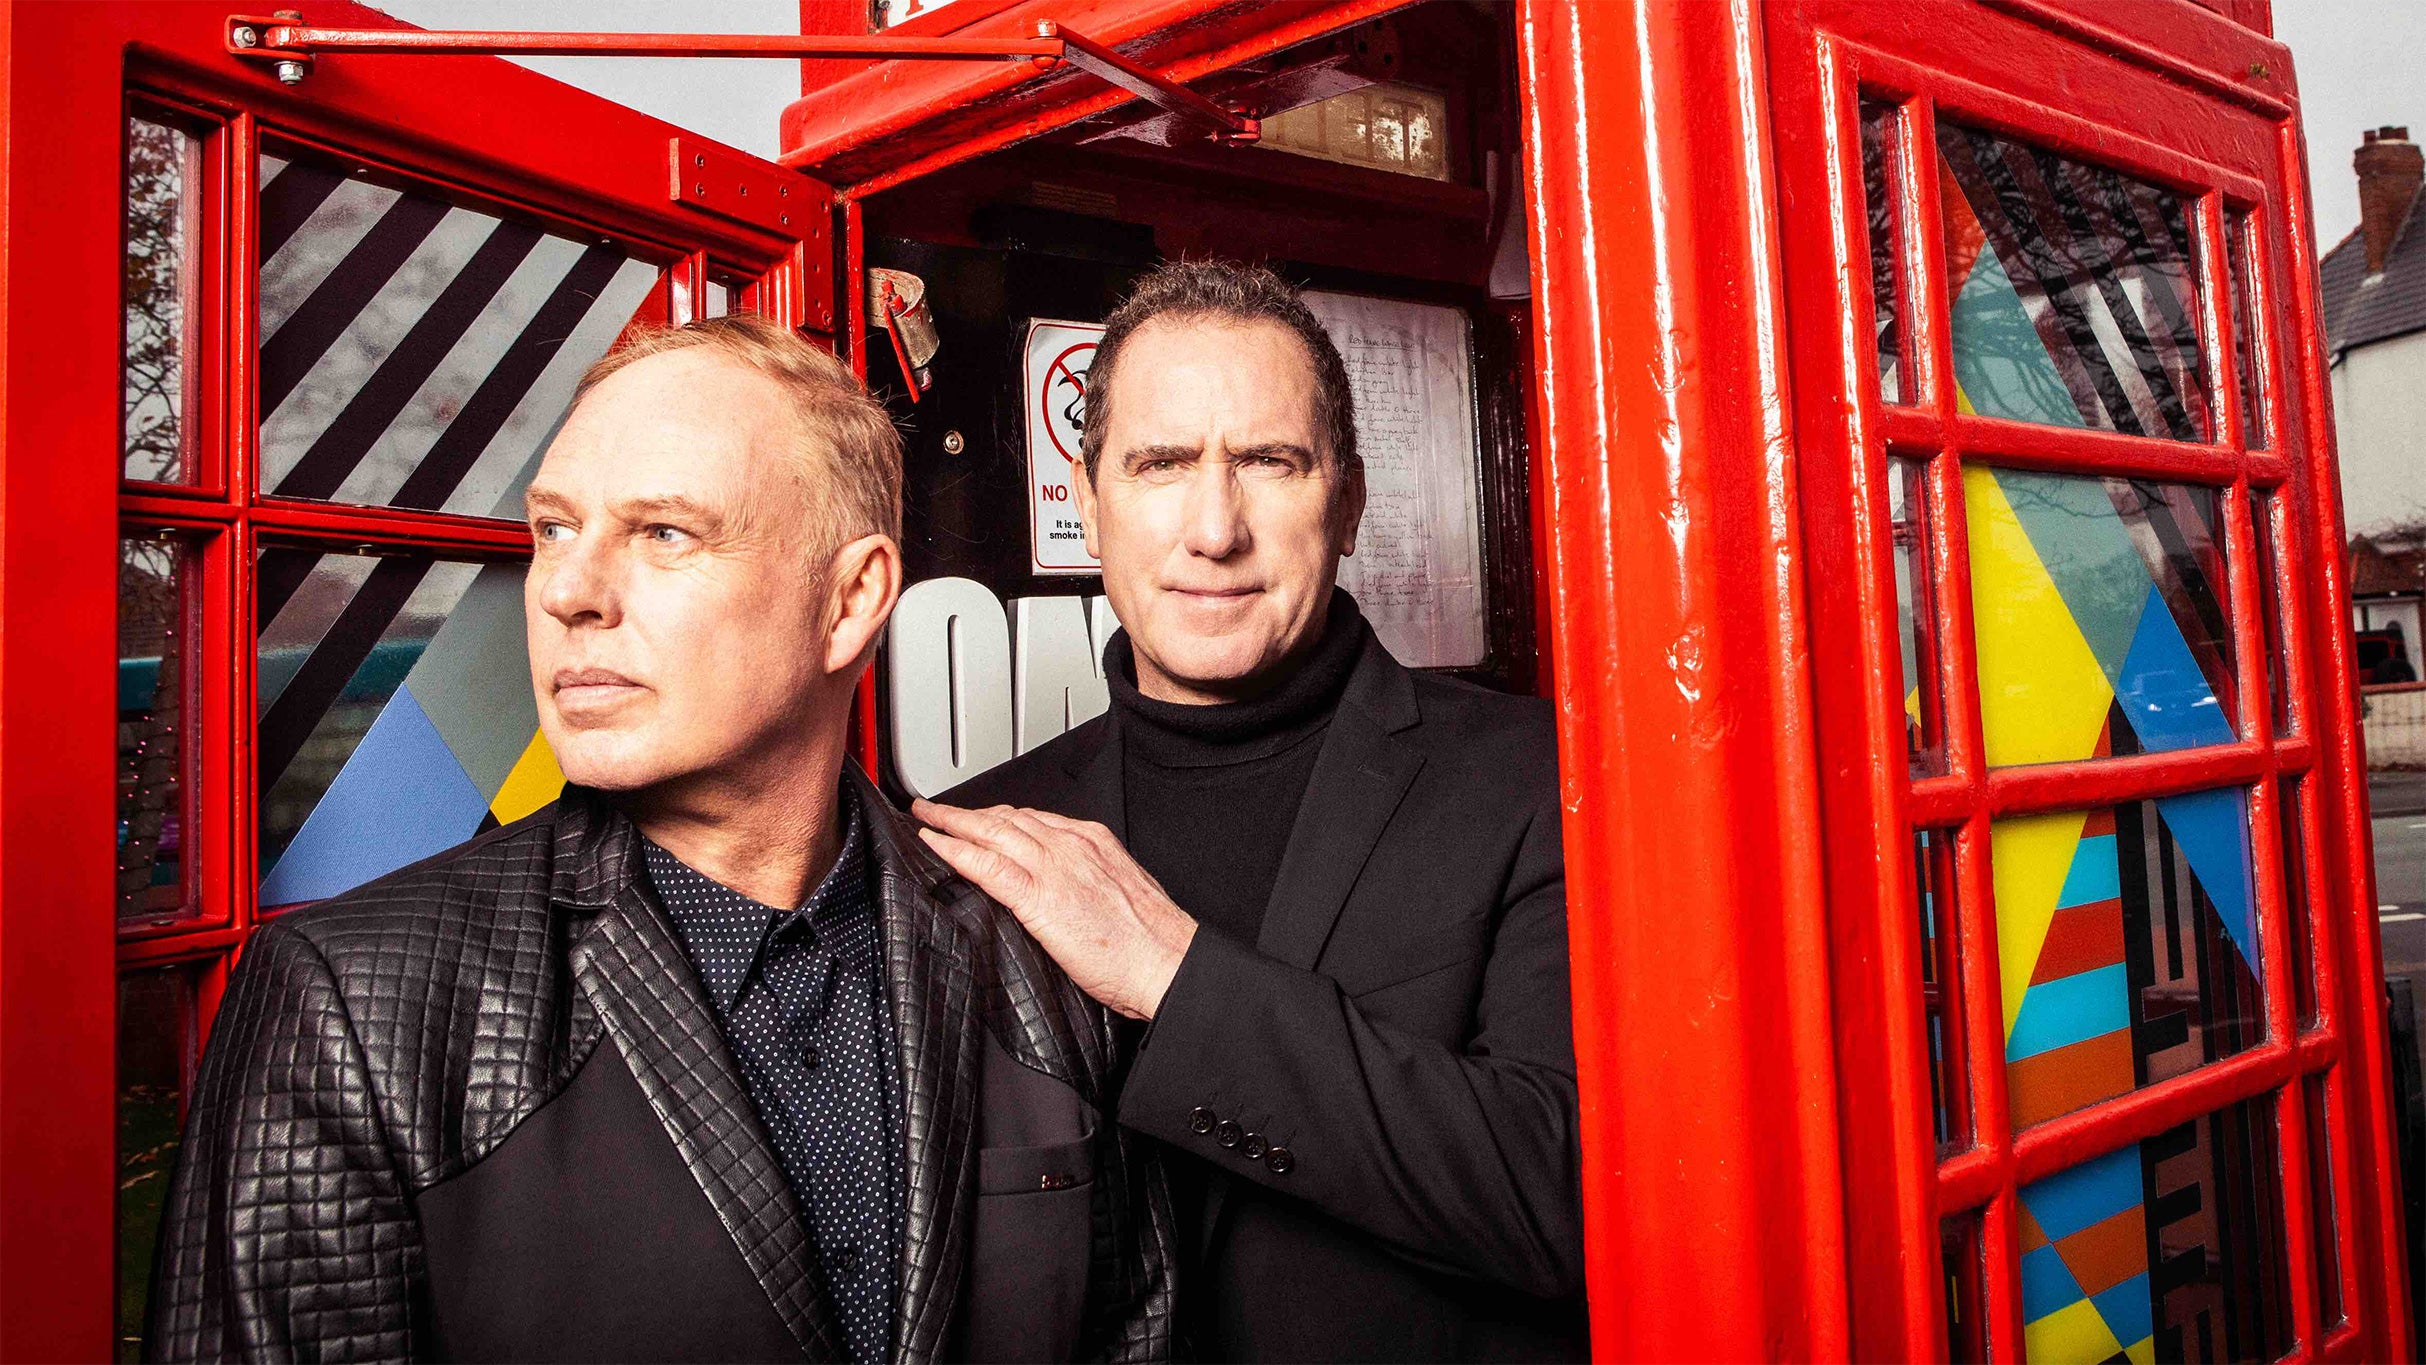 members only presale code to OMD - Orchestral Manoeuvres in the Dark tickets in Los Angeles at Greek Theatre